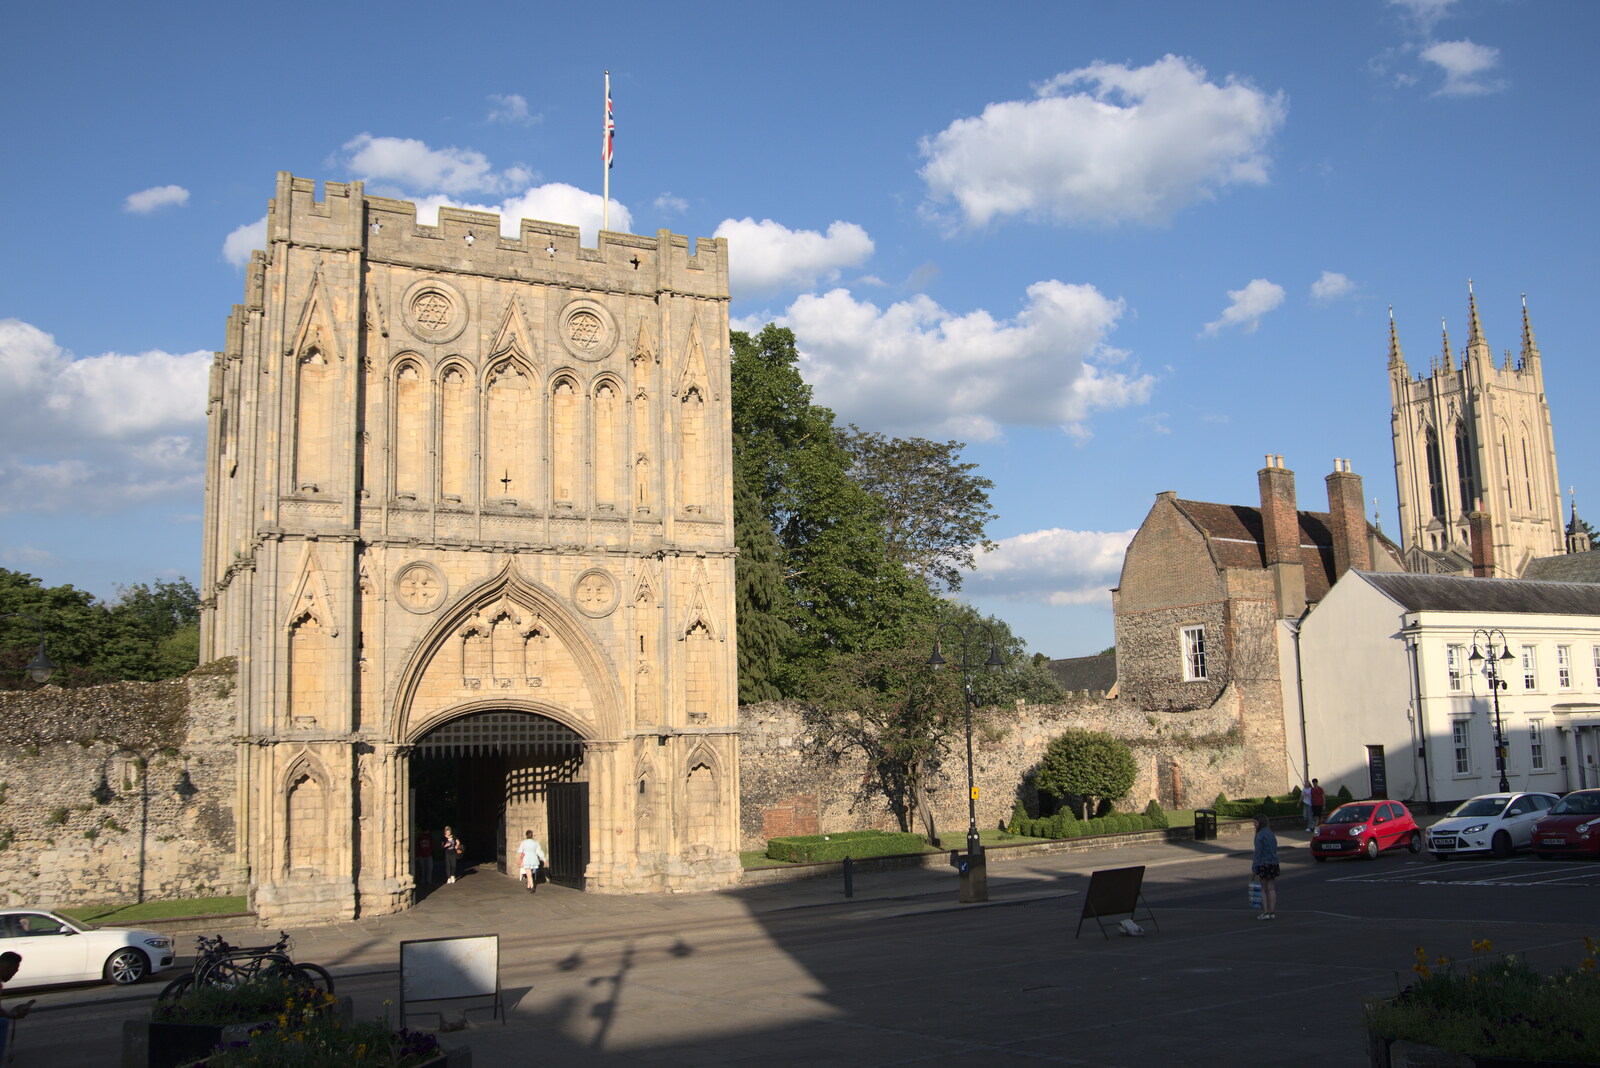 Abbey Gate from A Weekend at the Angel Hotel, Bury St. Edmunds, Suffolk - 5th June 2021